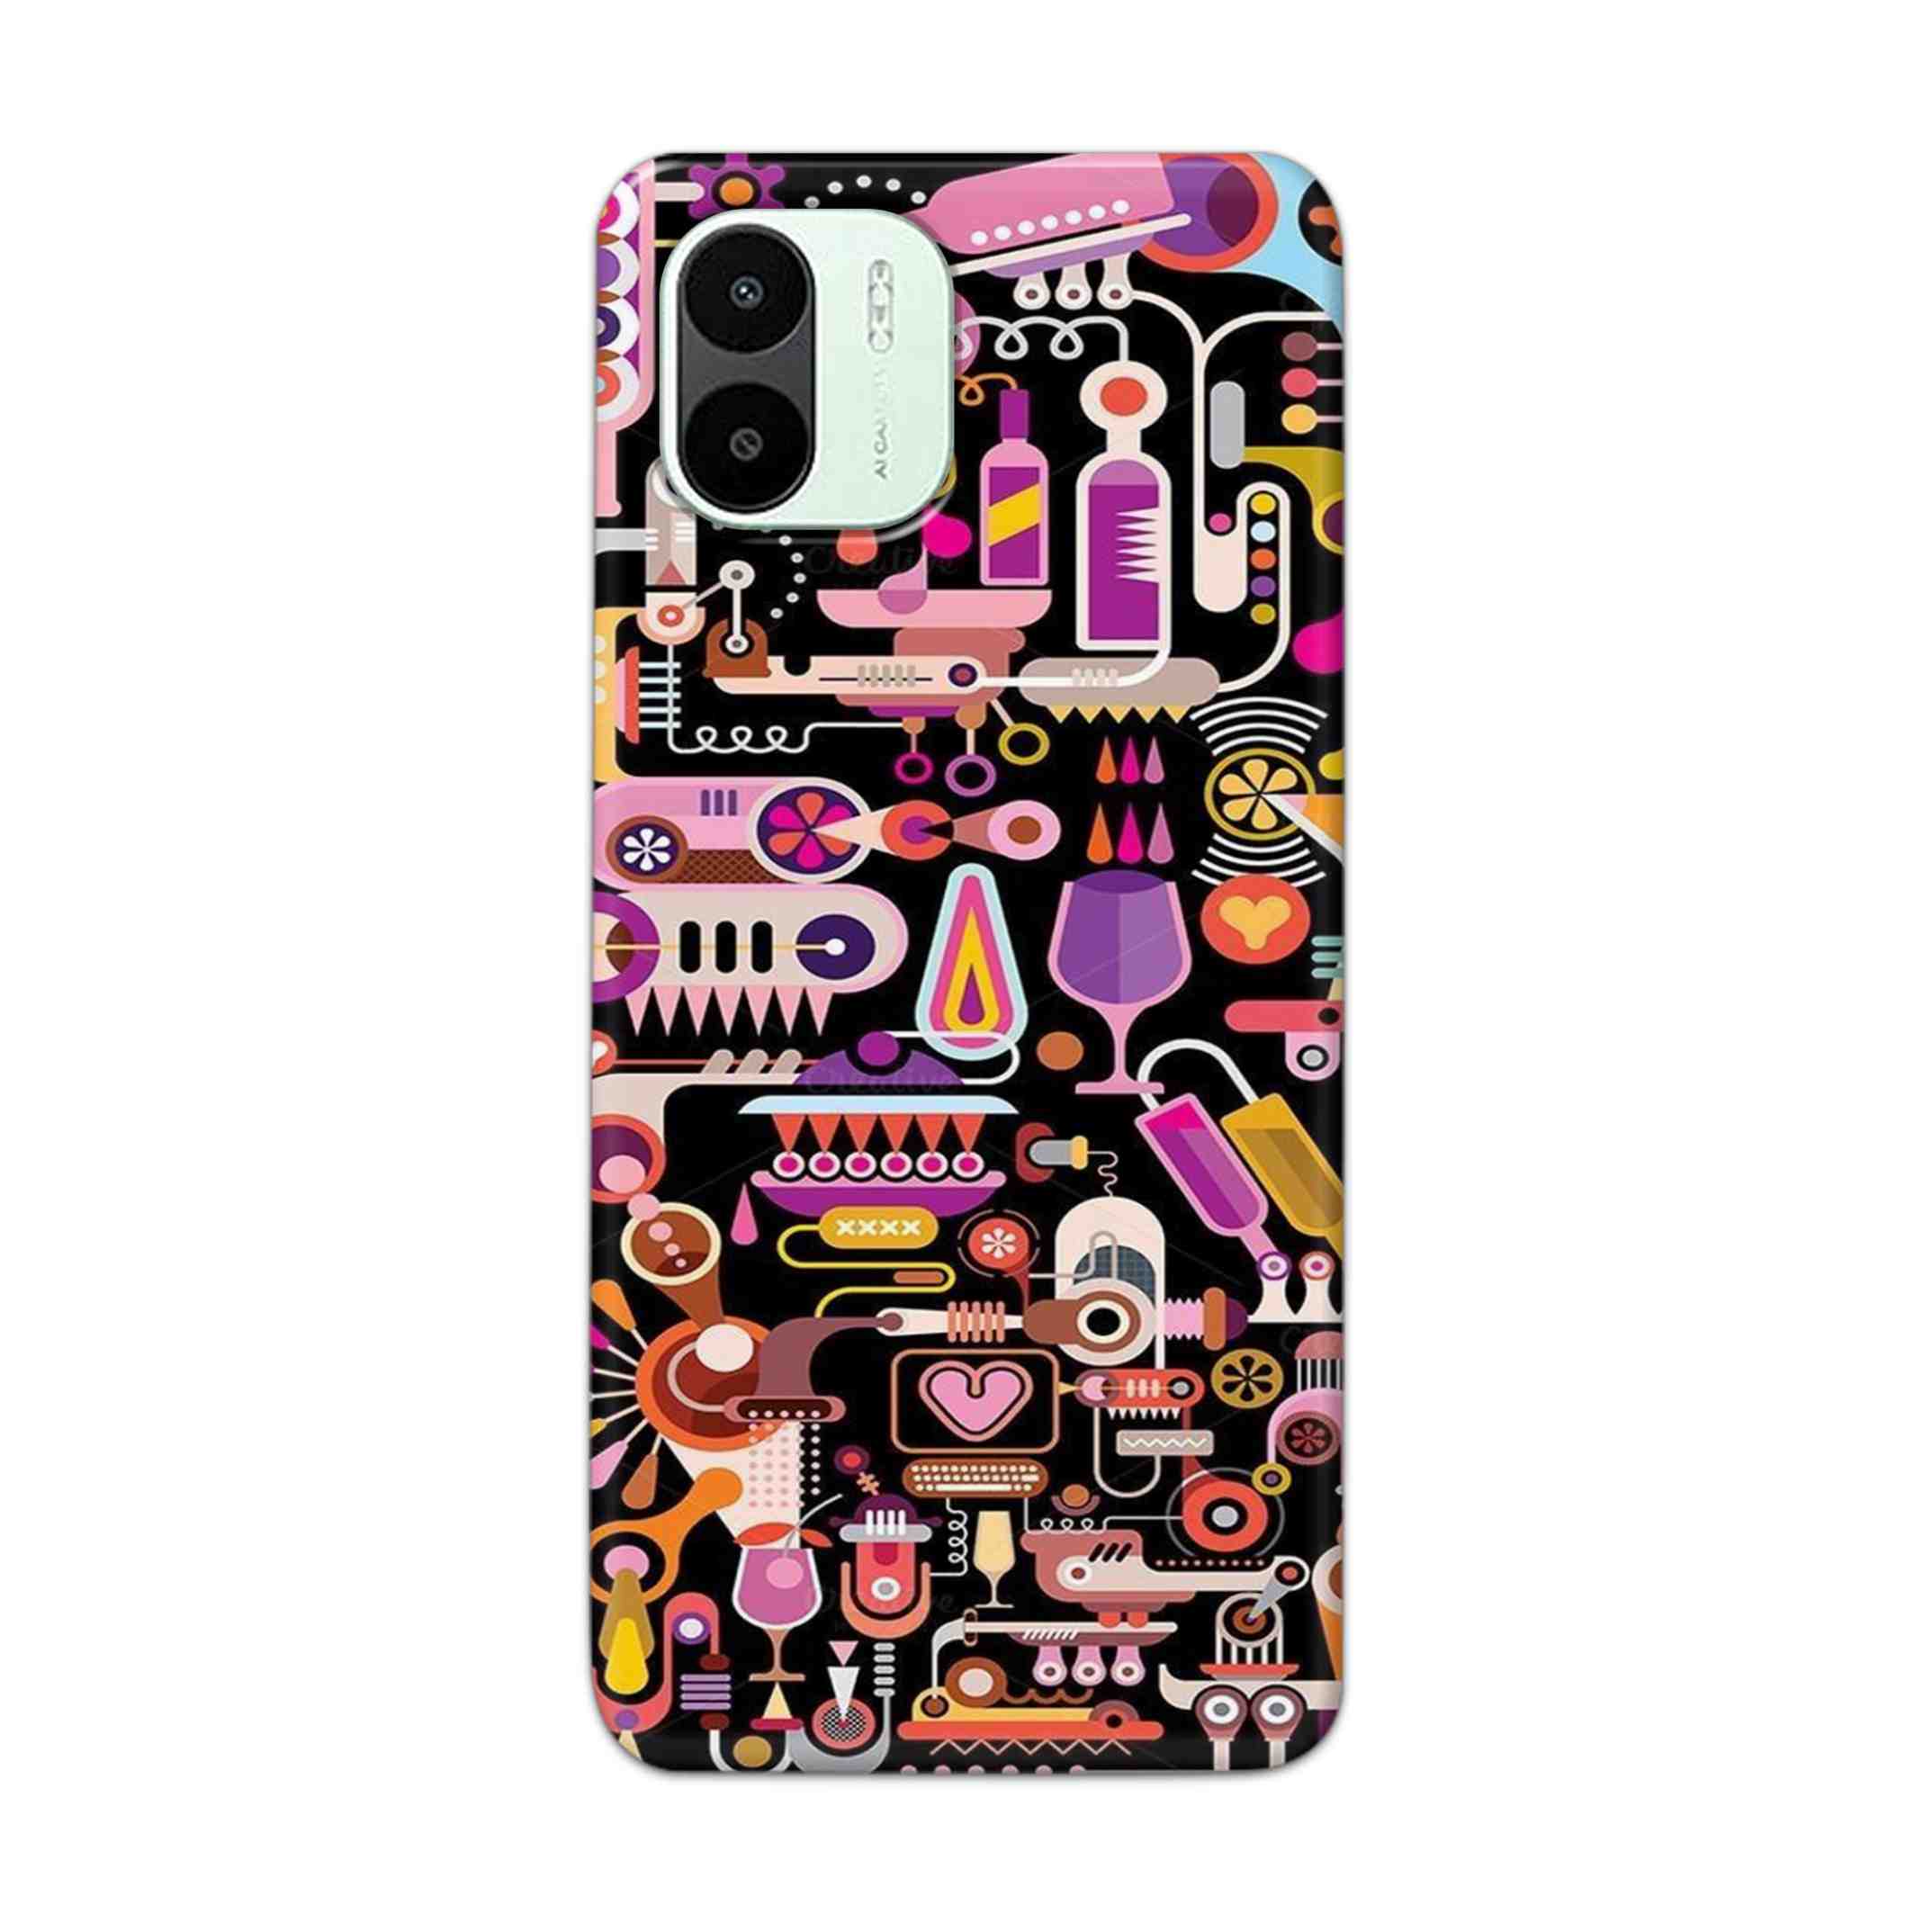 Buy Lab Art Hard Back Mobile Phone Case Cover For Xiaomi Redmi A1 5G Online